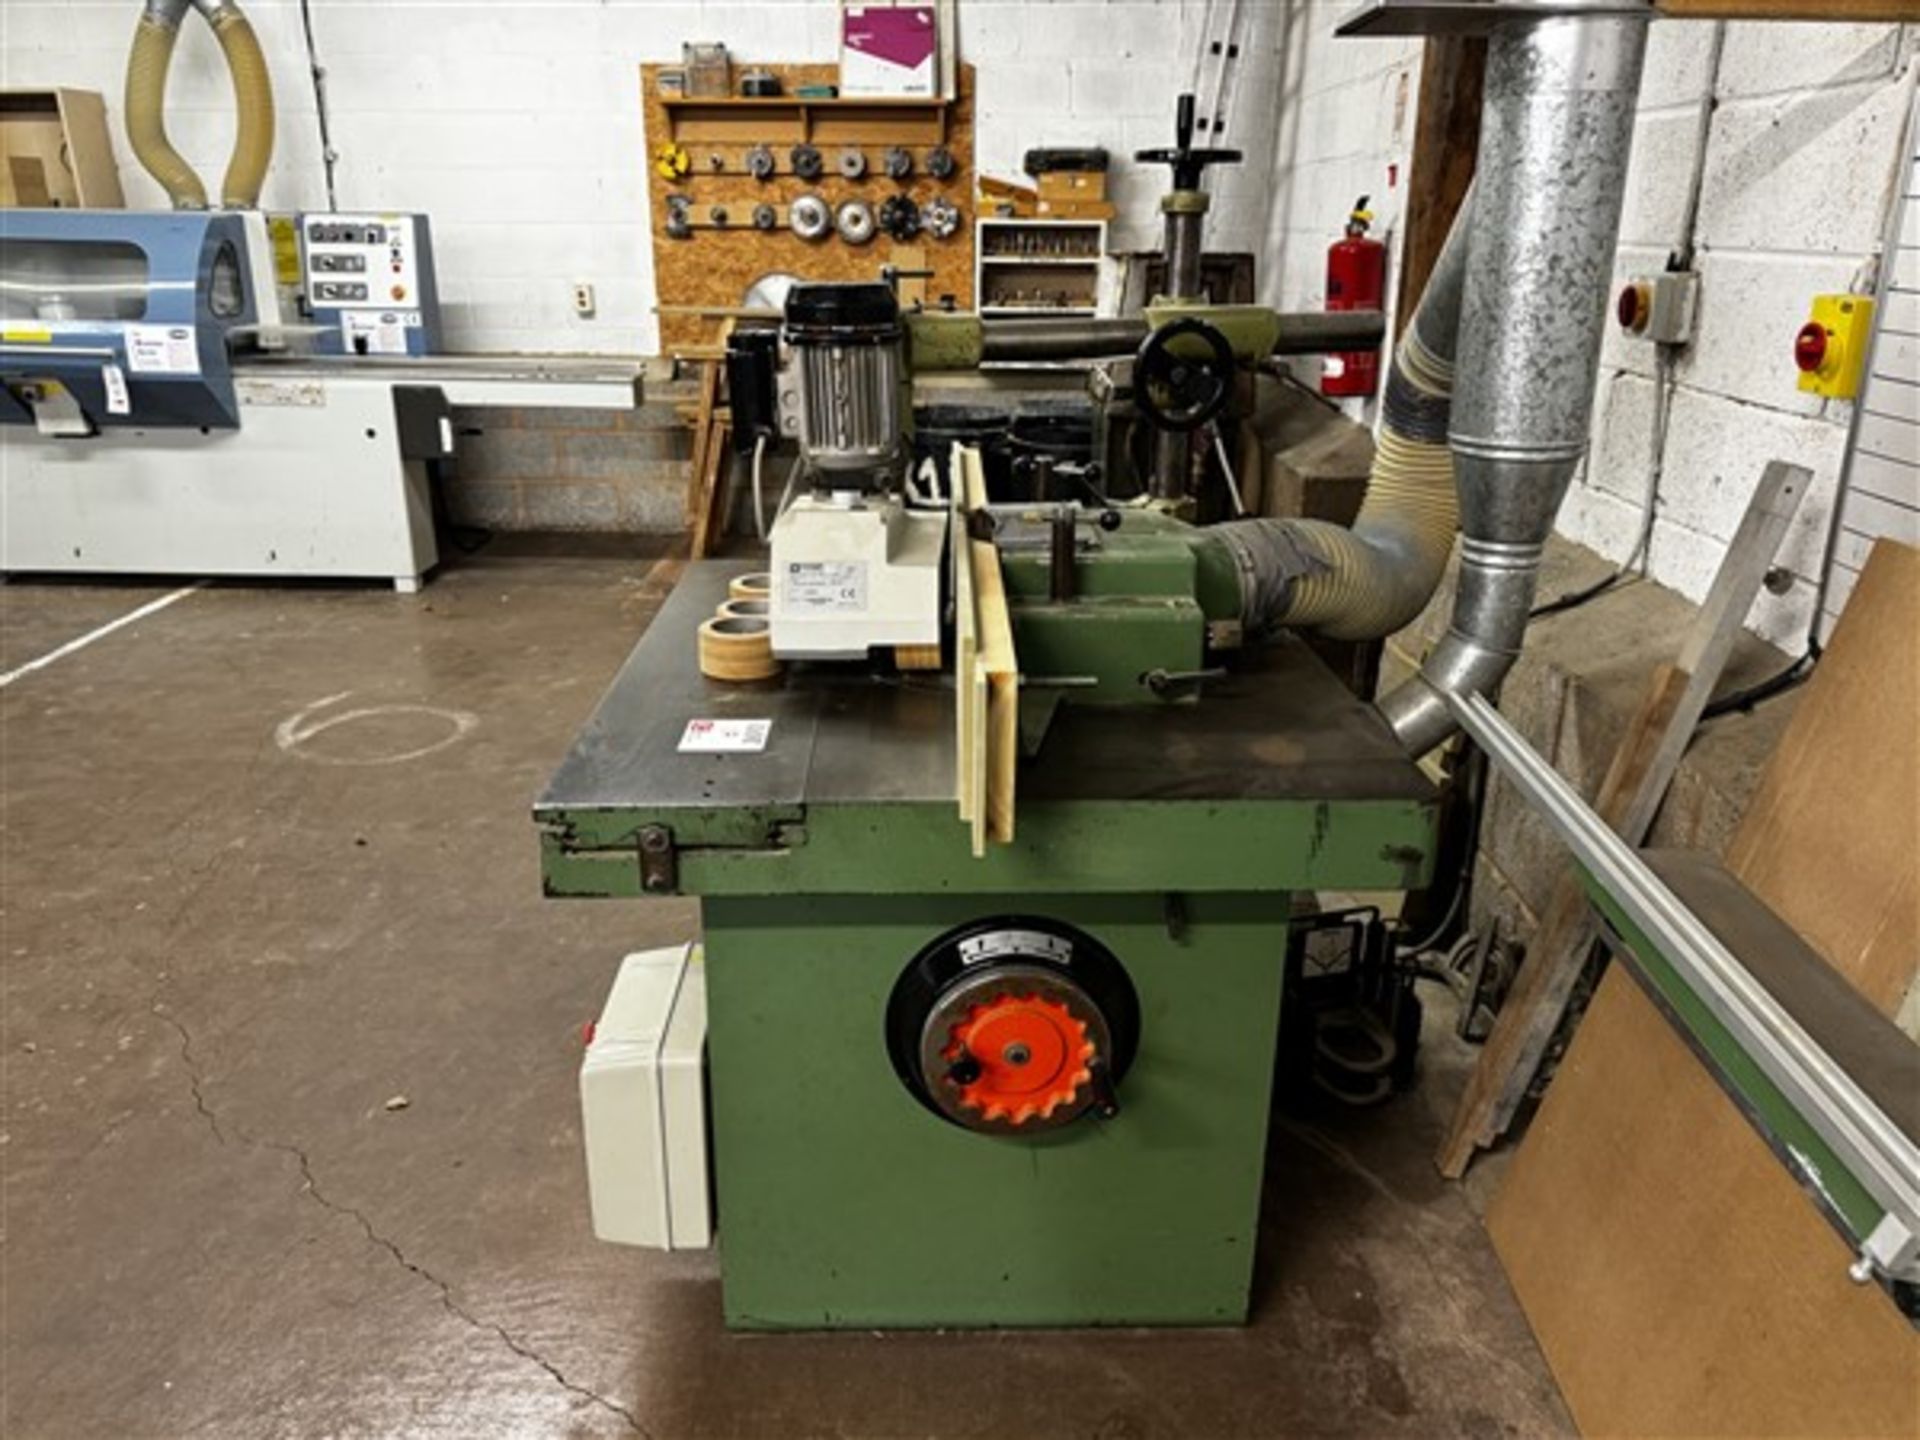 NMC spindle moulder, 380v, type F-115, serial no. 85/43/218, with Maggi feed unit, type 12720501, - Image 4 of 8